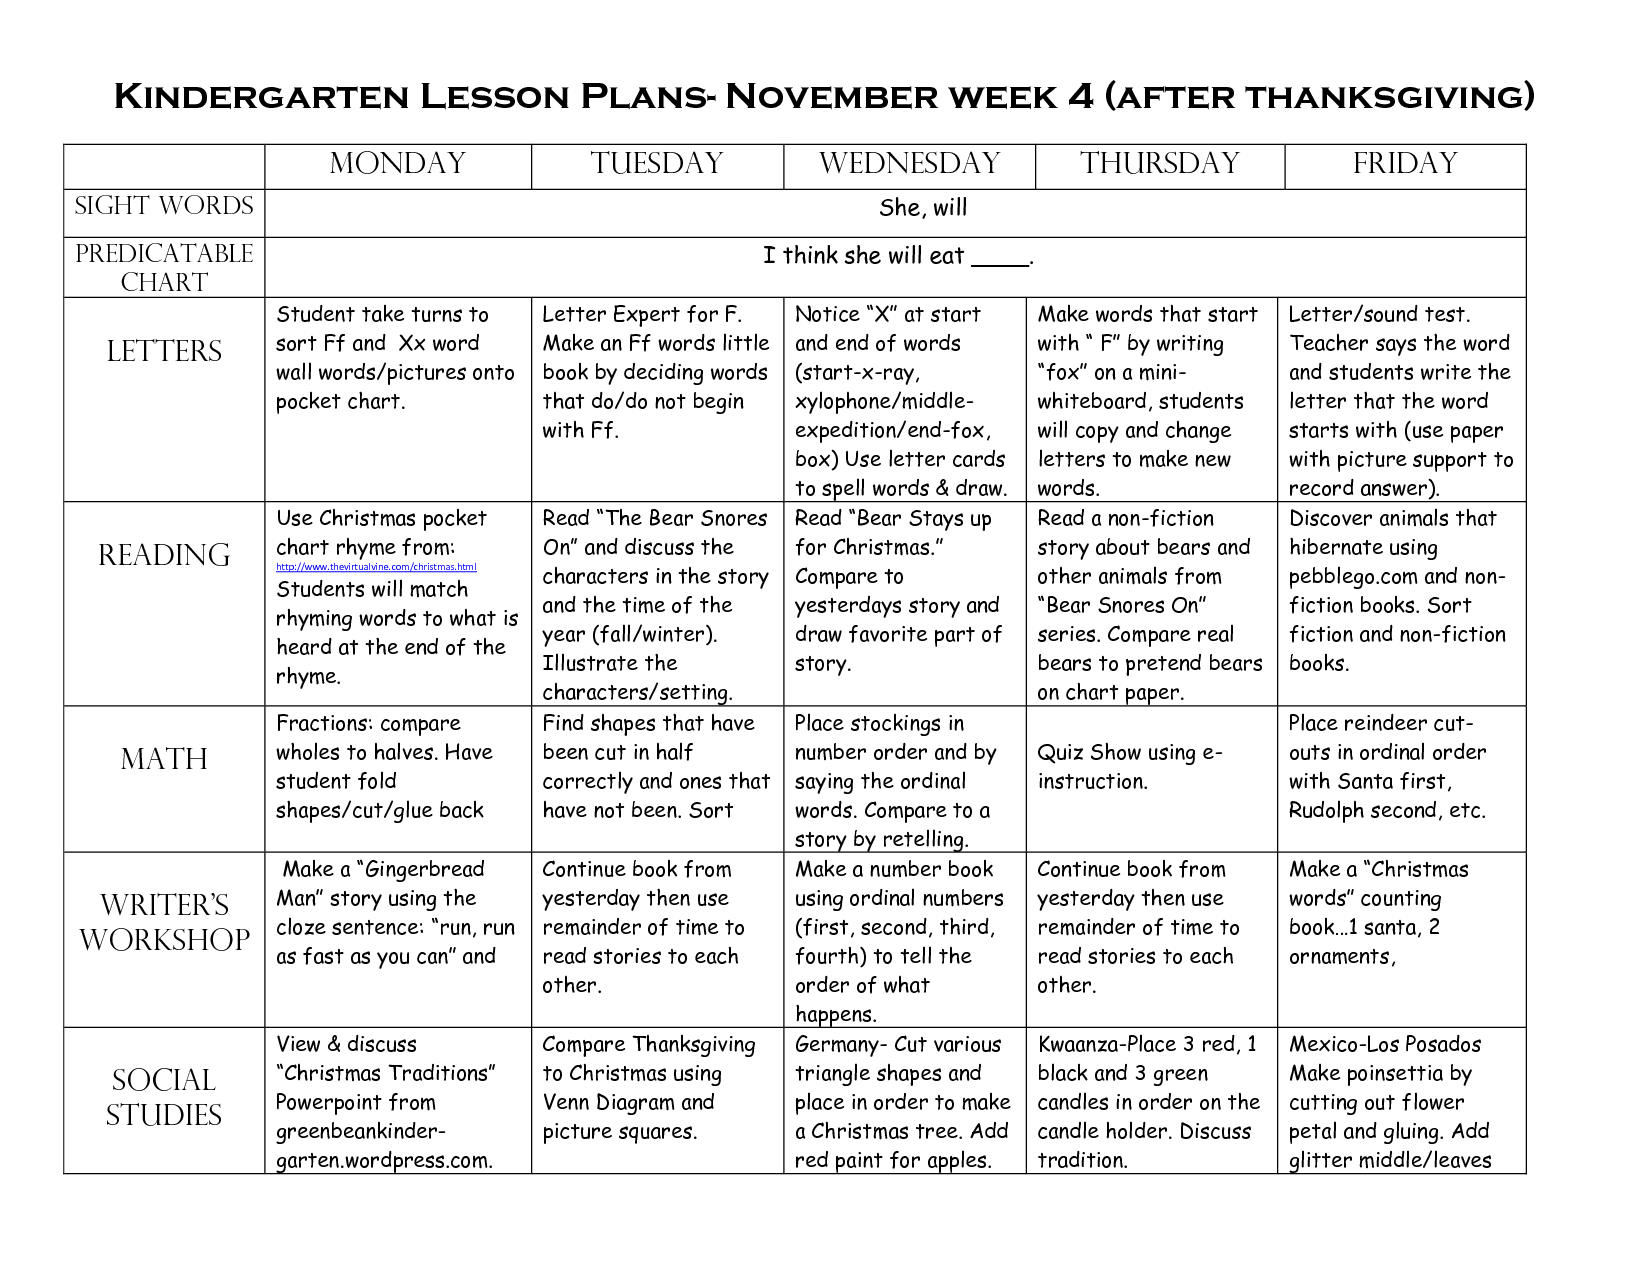 Writing lesson plans. Lesson Plan for Kindergarten. Lesson Plan for writing. Weekly Plan for Kindergarten. Lesson Plan for Kindergarten English.